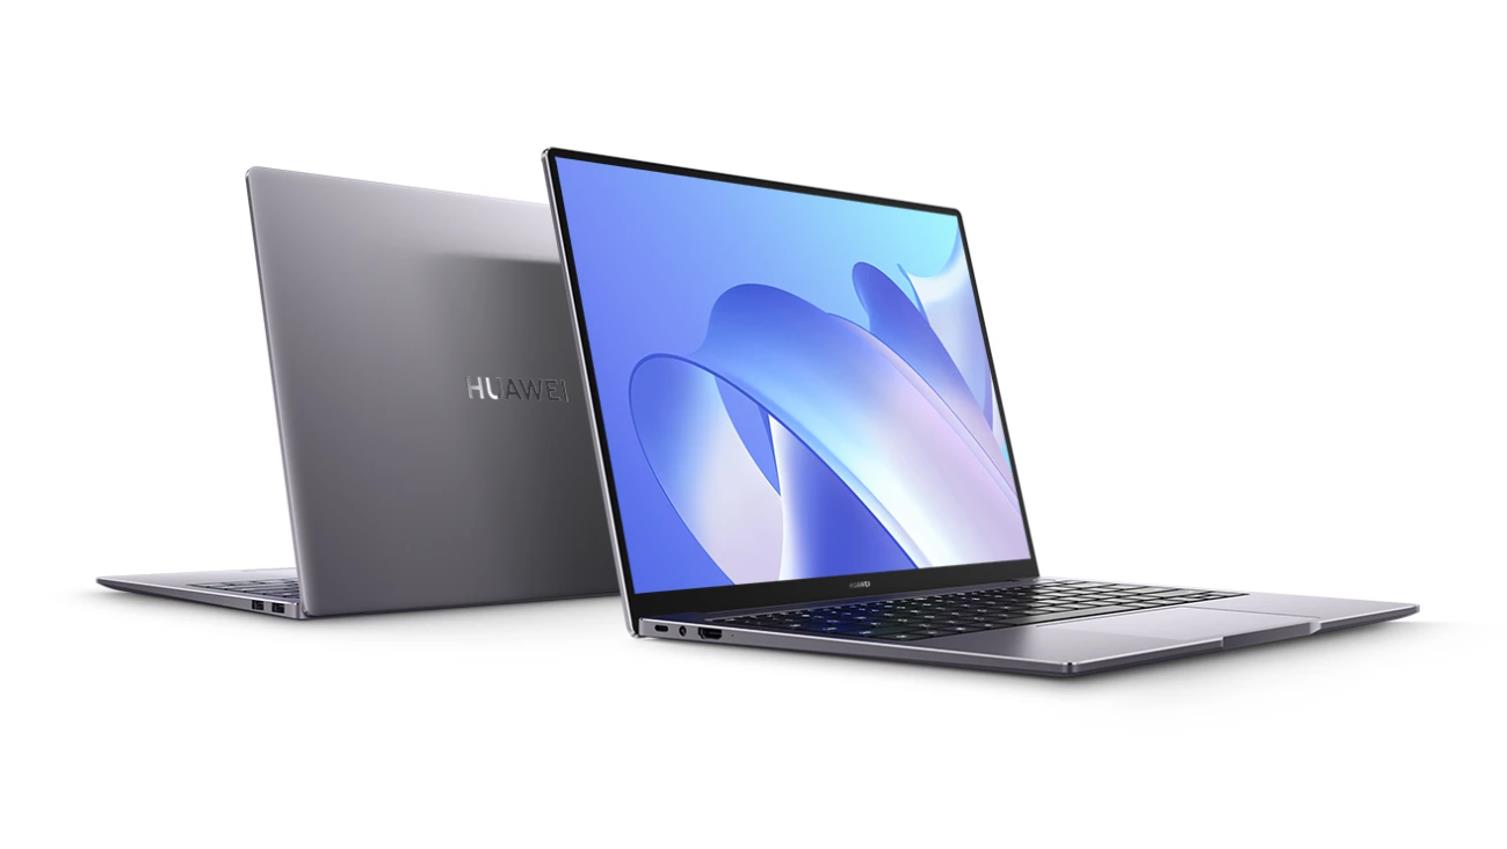 Choose Huawei Laptop according to your needs, where is your 